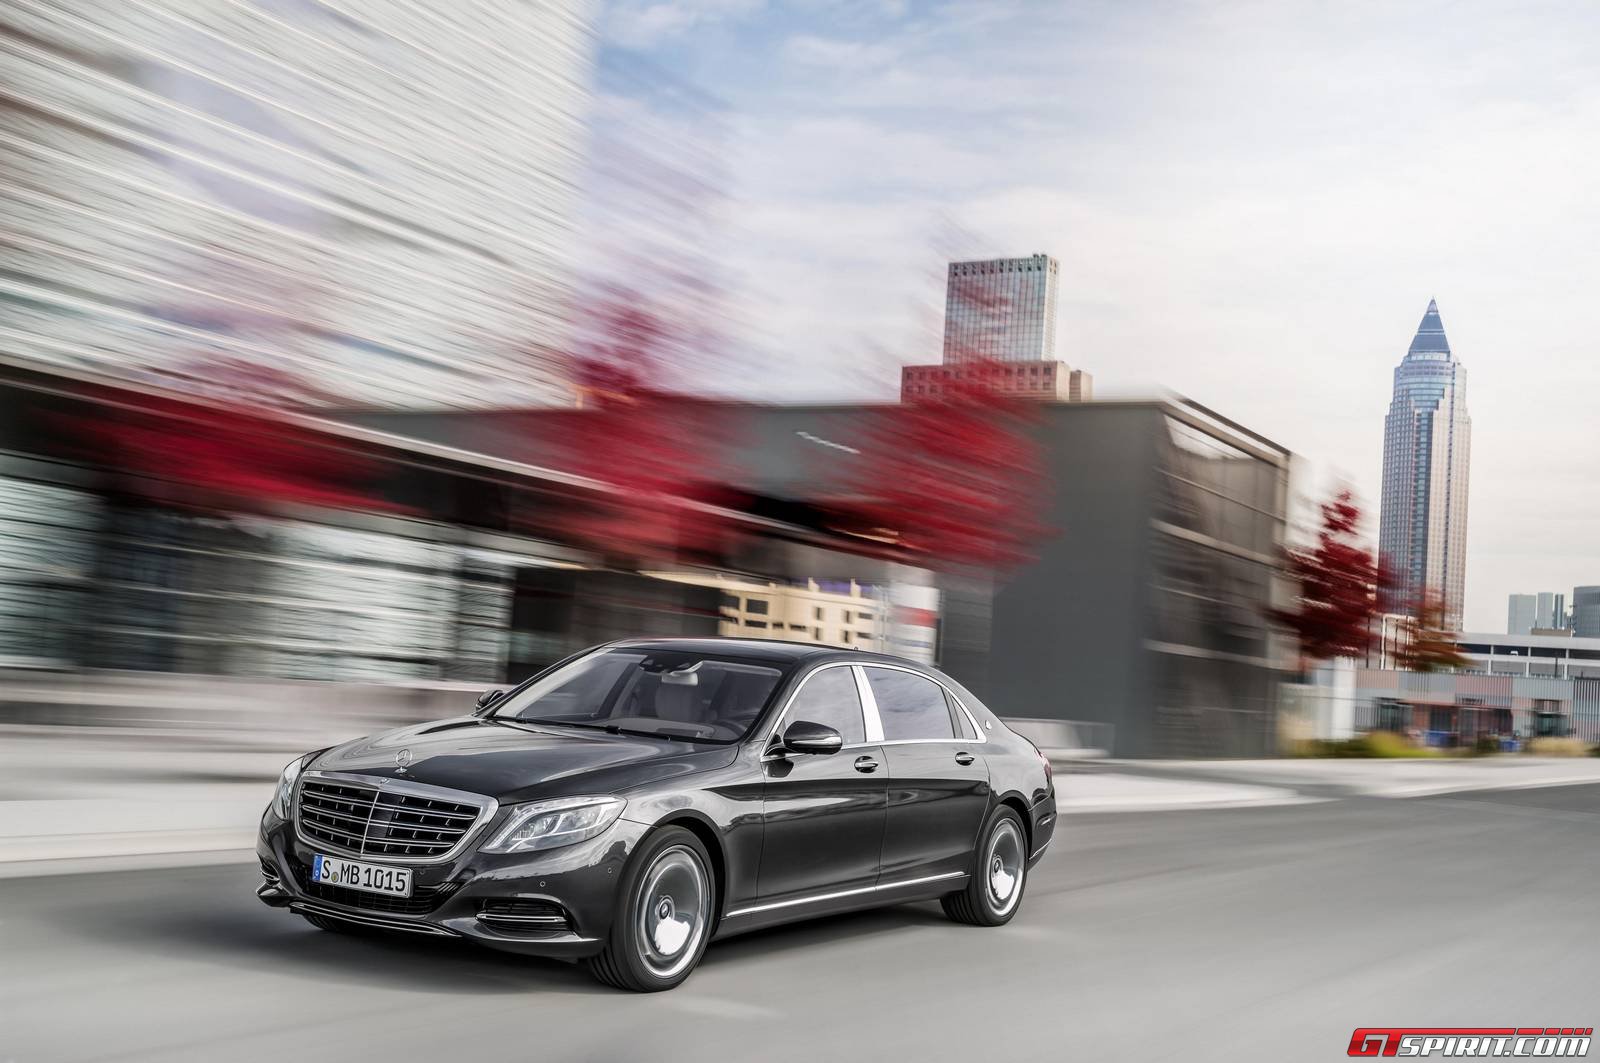 2015-mercedes-maybach-s600-2